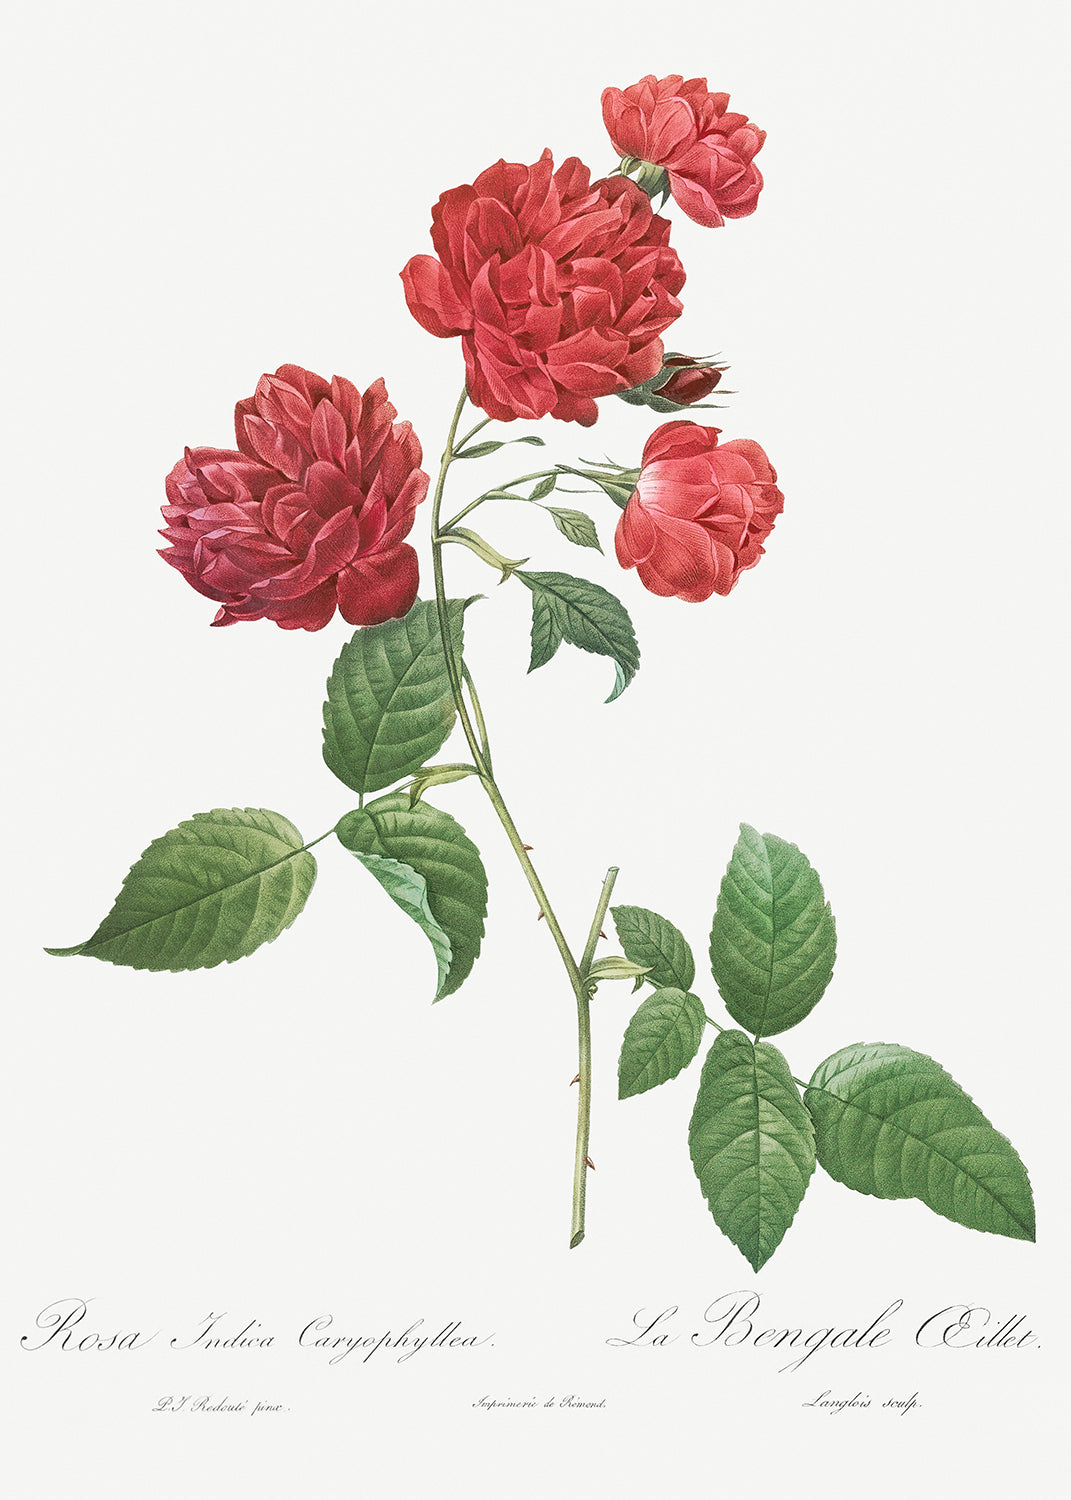 Botanical Plant Print - Red Cabbage Rose - Bengal eyelet (Rosa indica caryophyllea) by Pierre Joseph Redoute